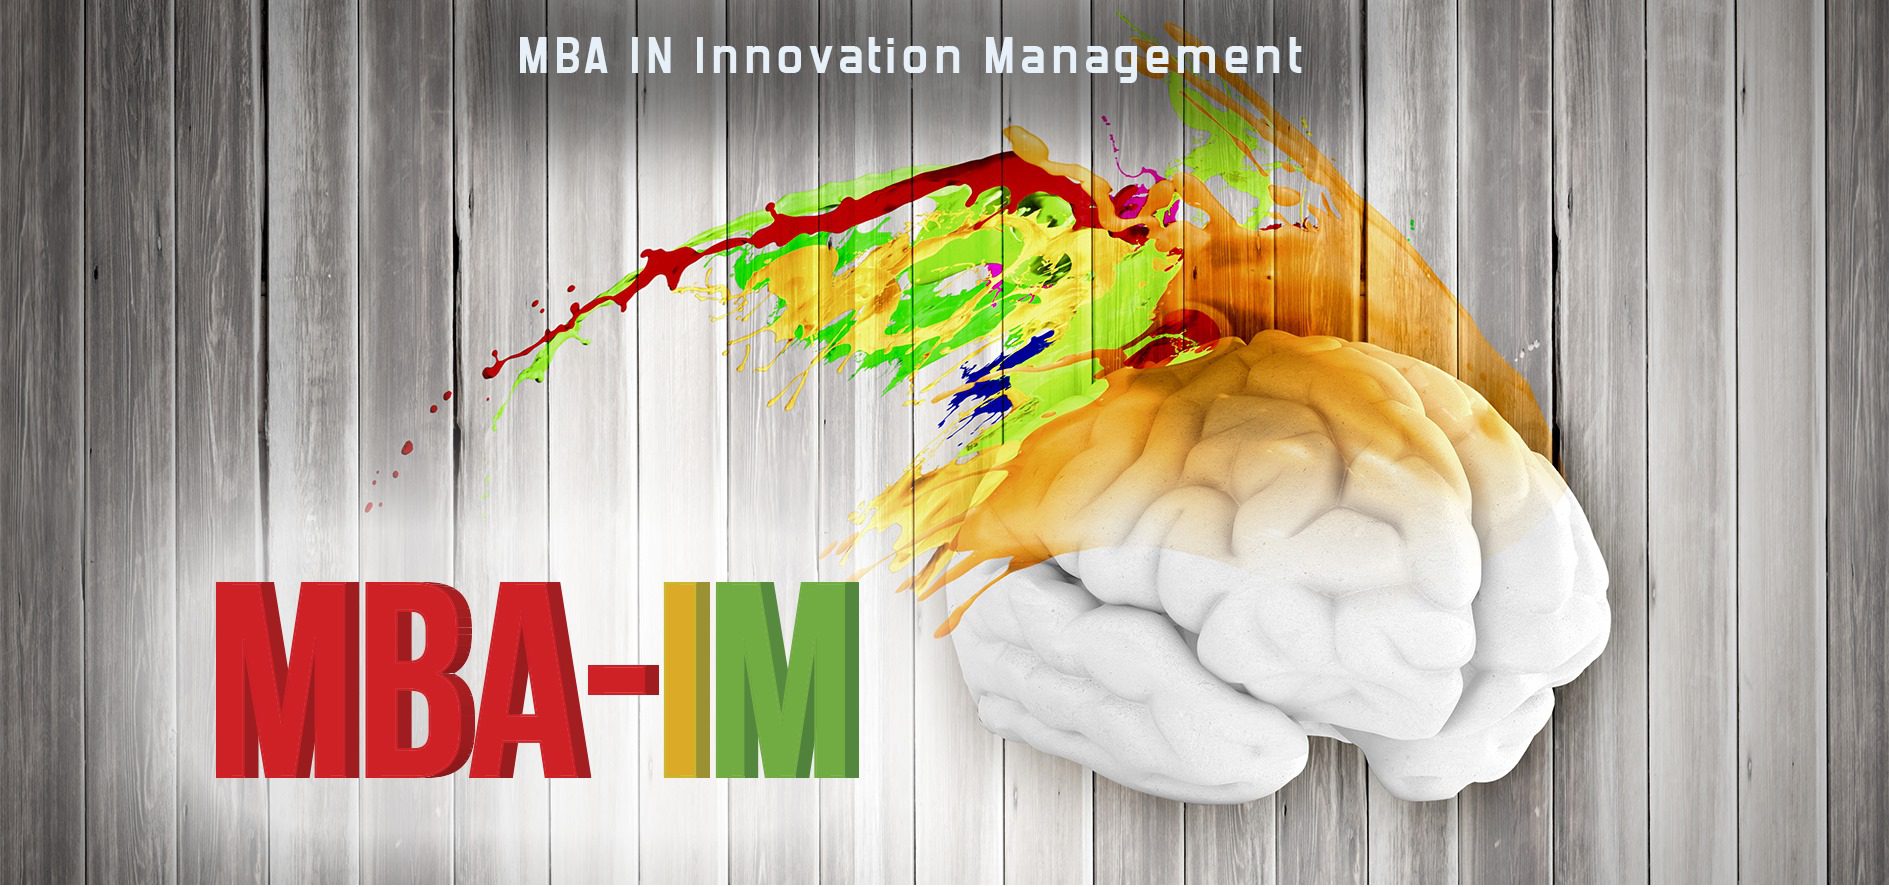 MBA In Innovation Management